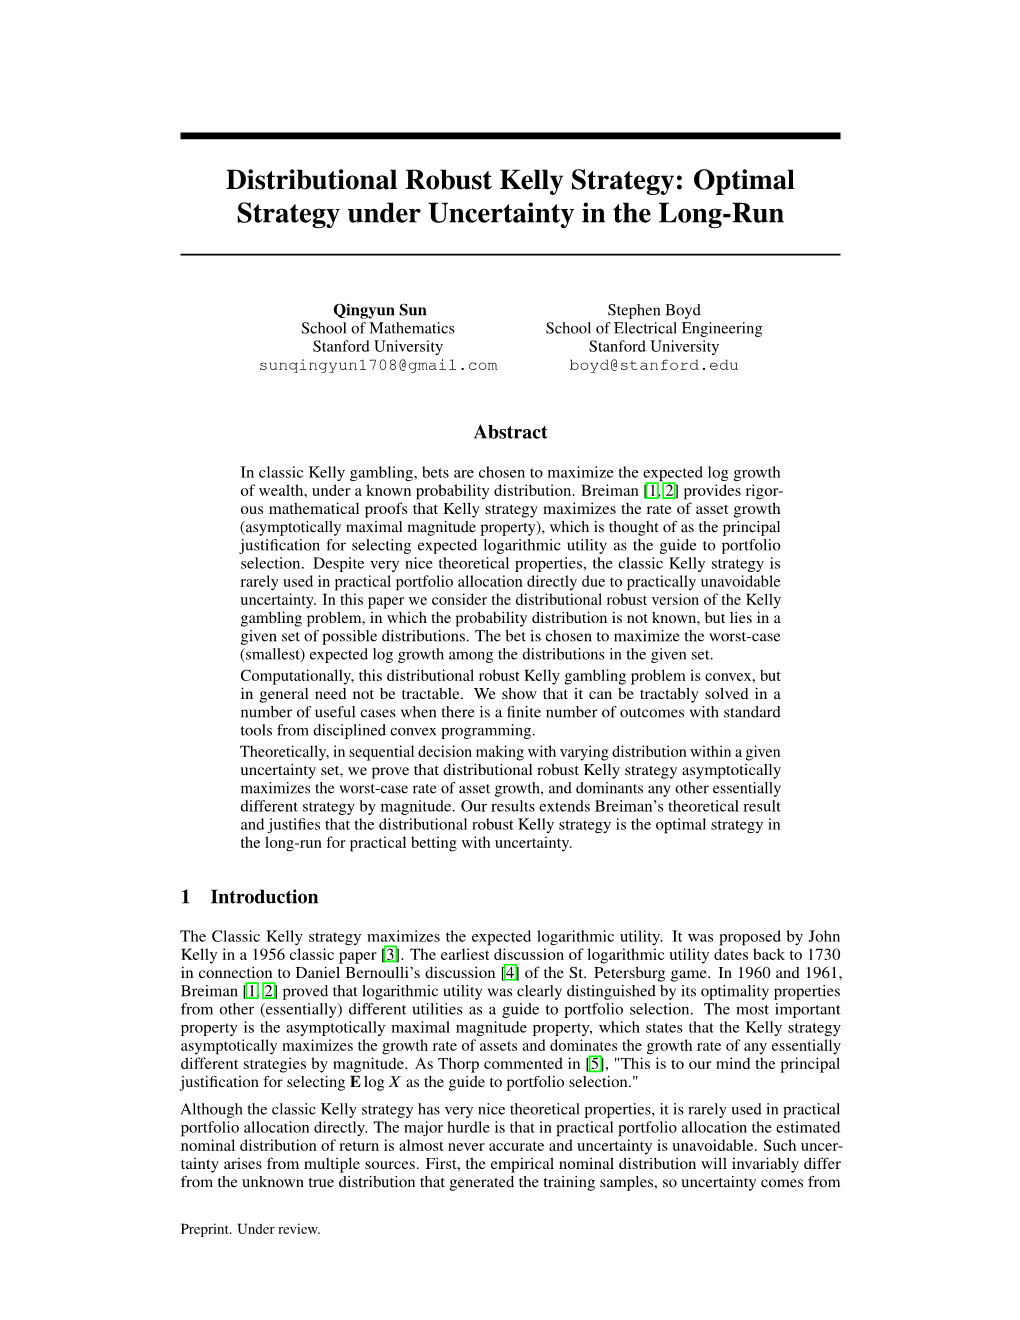 Optimal Strategy Under Uncertainty in the Long-Run